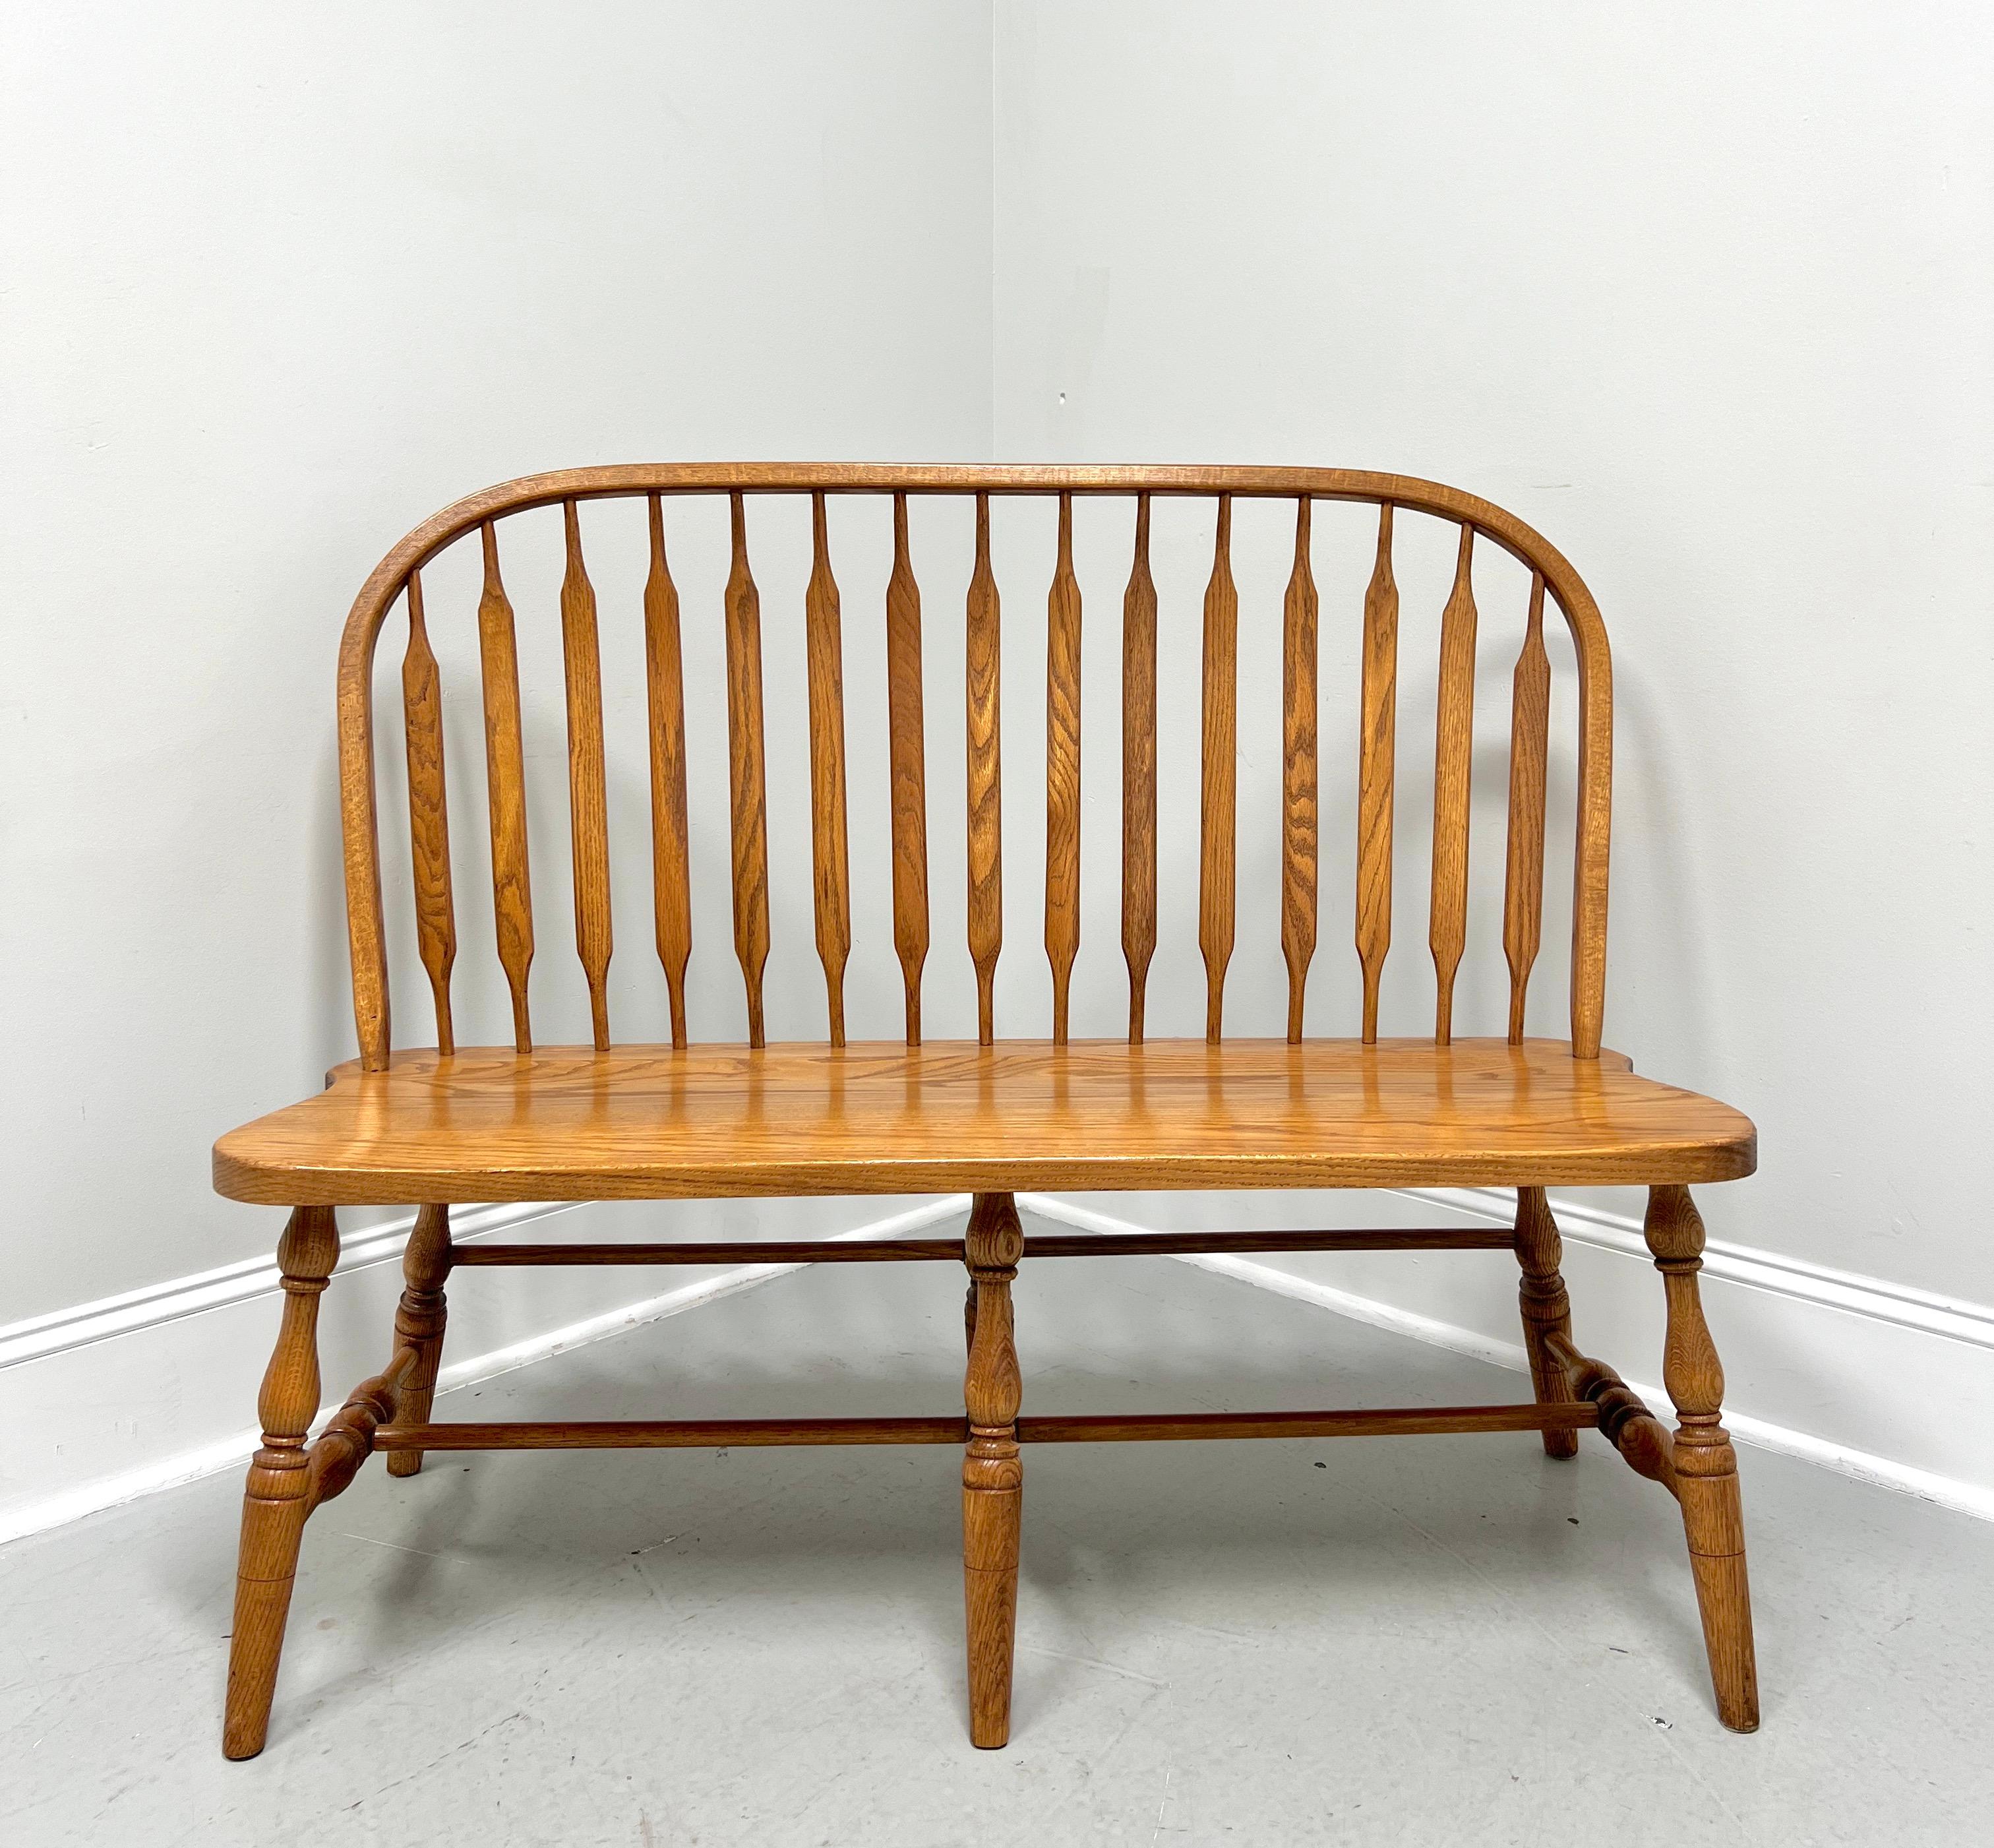 A handcrafted Windsor bench in the Rockford style by Amish craftsmen. Solid oak, bowback, cattail spindles, solid seat, turned legs, turned side & middle stretchers, and rounded center & back stretchers.  Made in the USA, in the late 20th